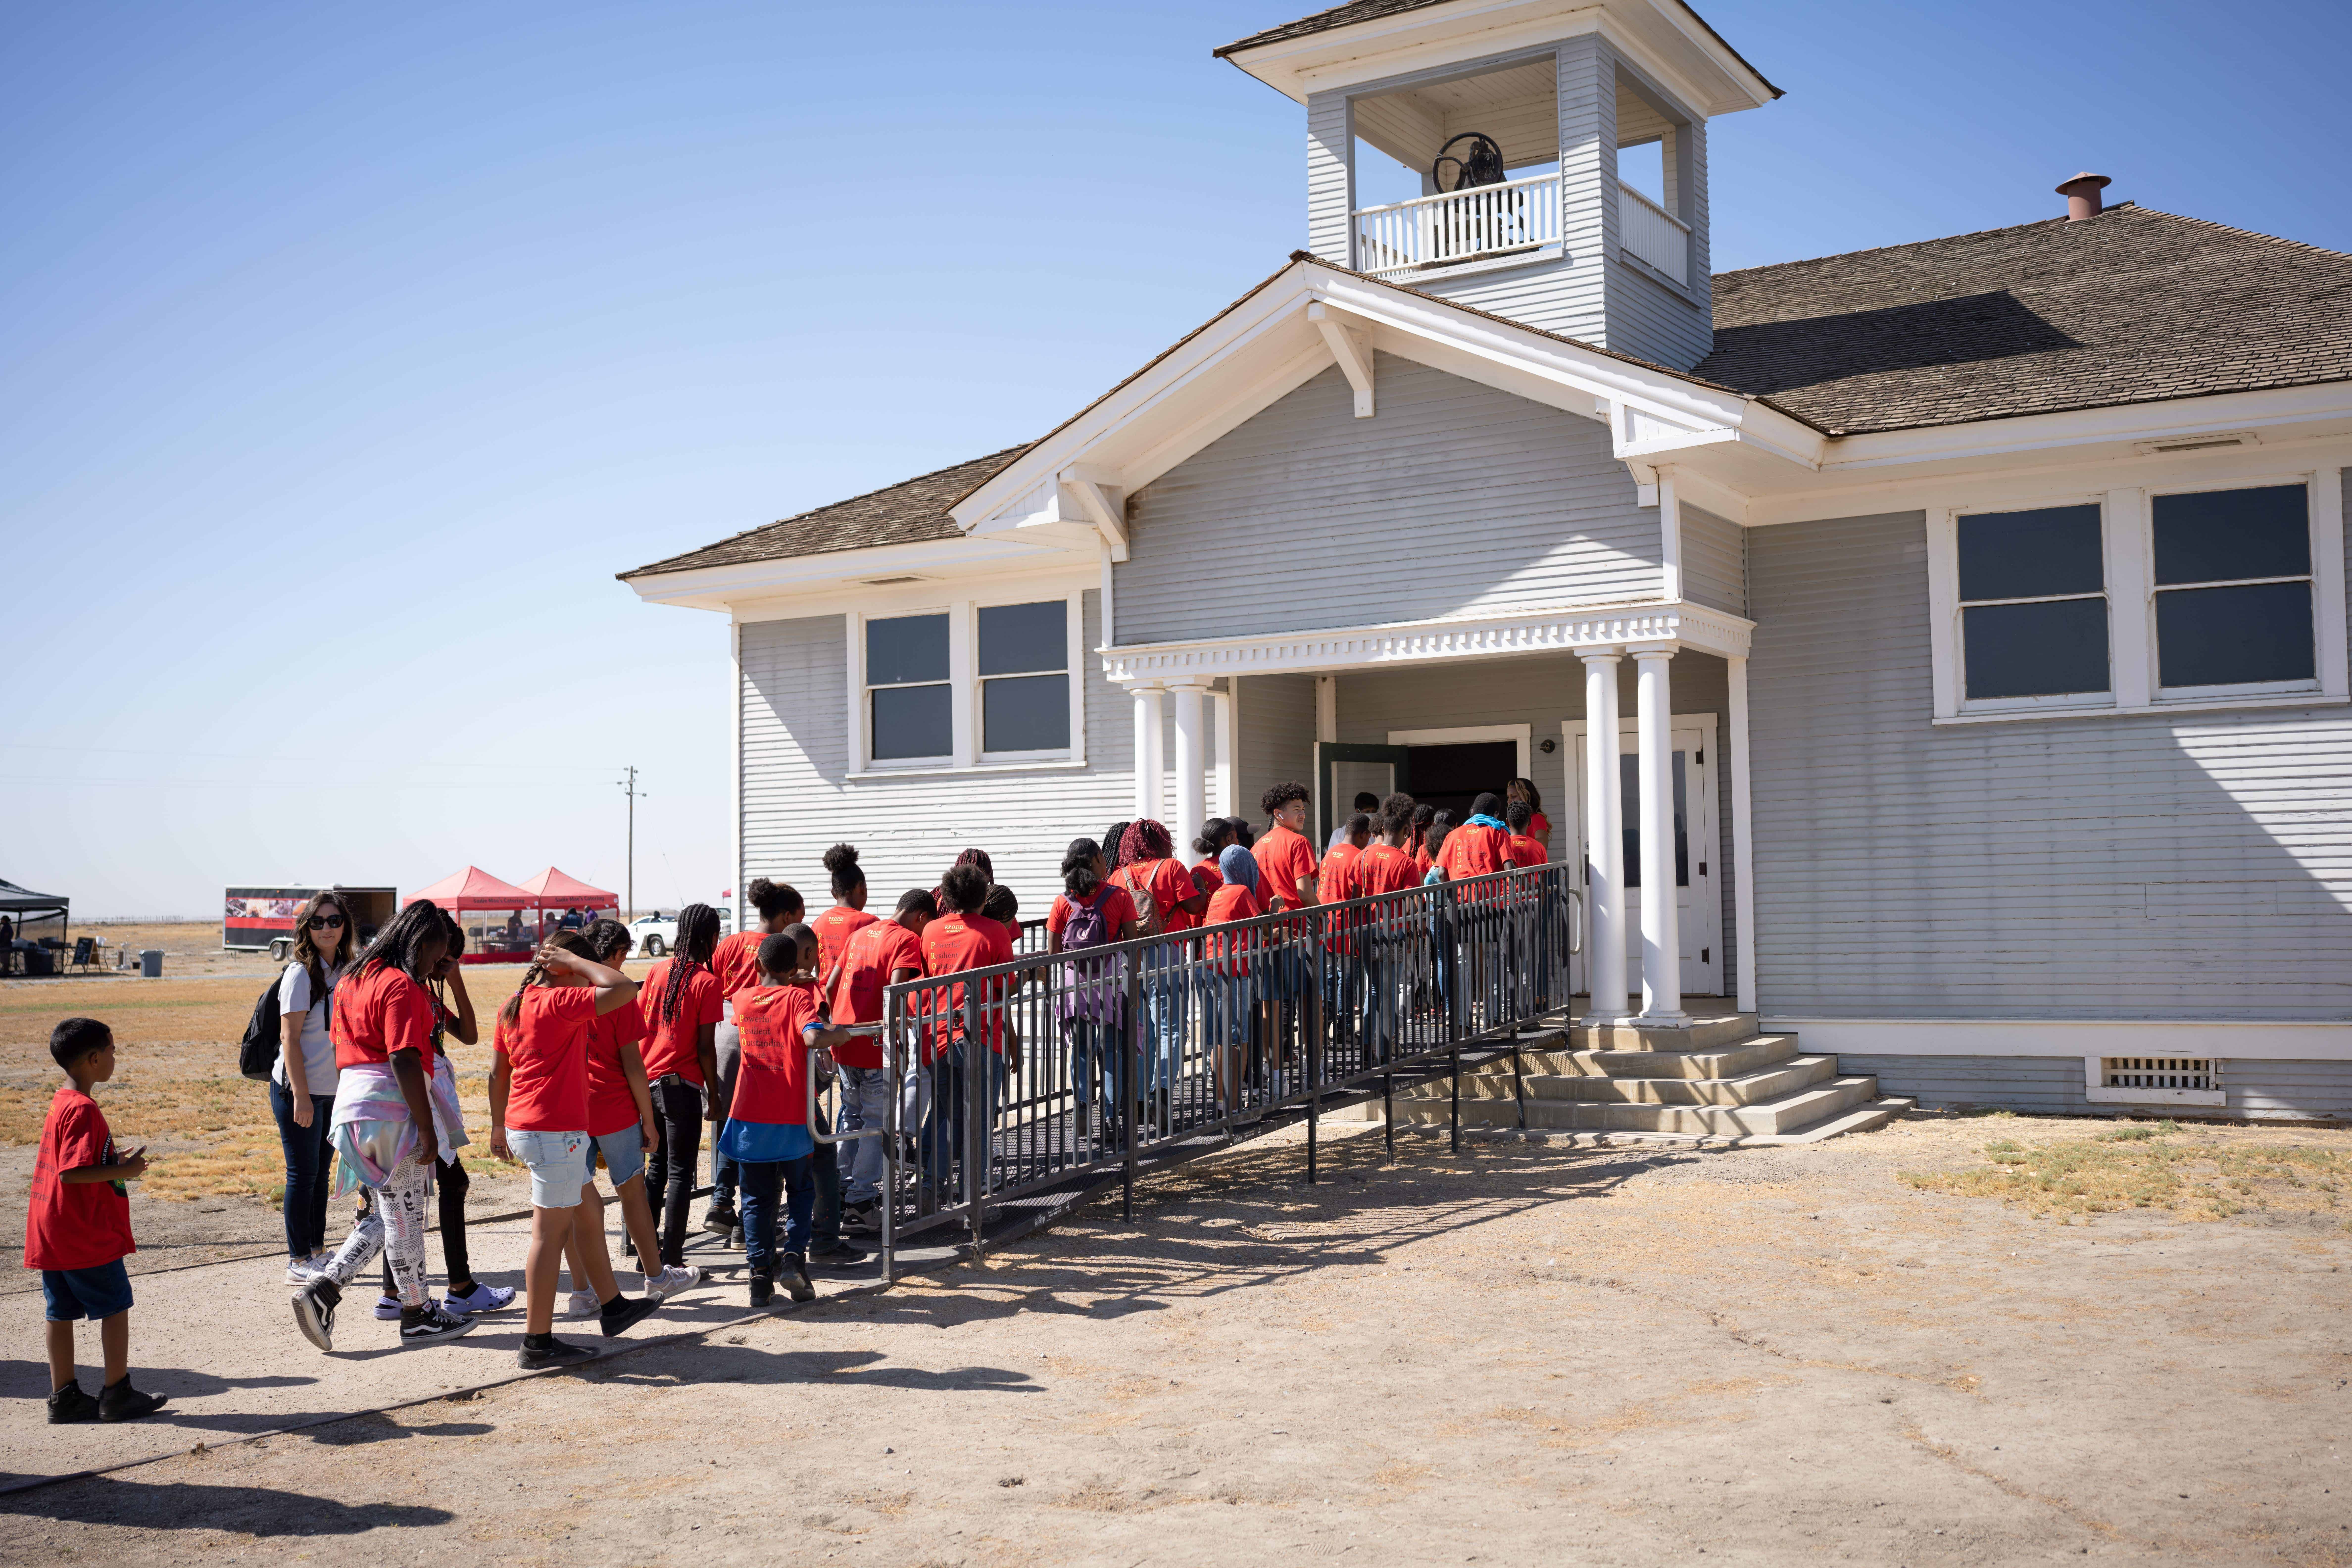 Best things to do in Allensworth CA - Carmen Setness - Guests entering schoolhouse at Allensworth